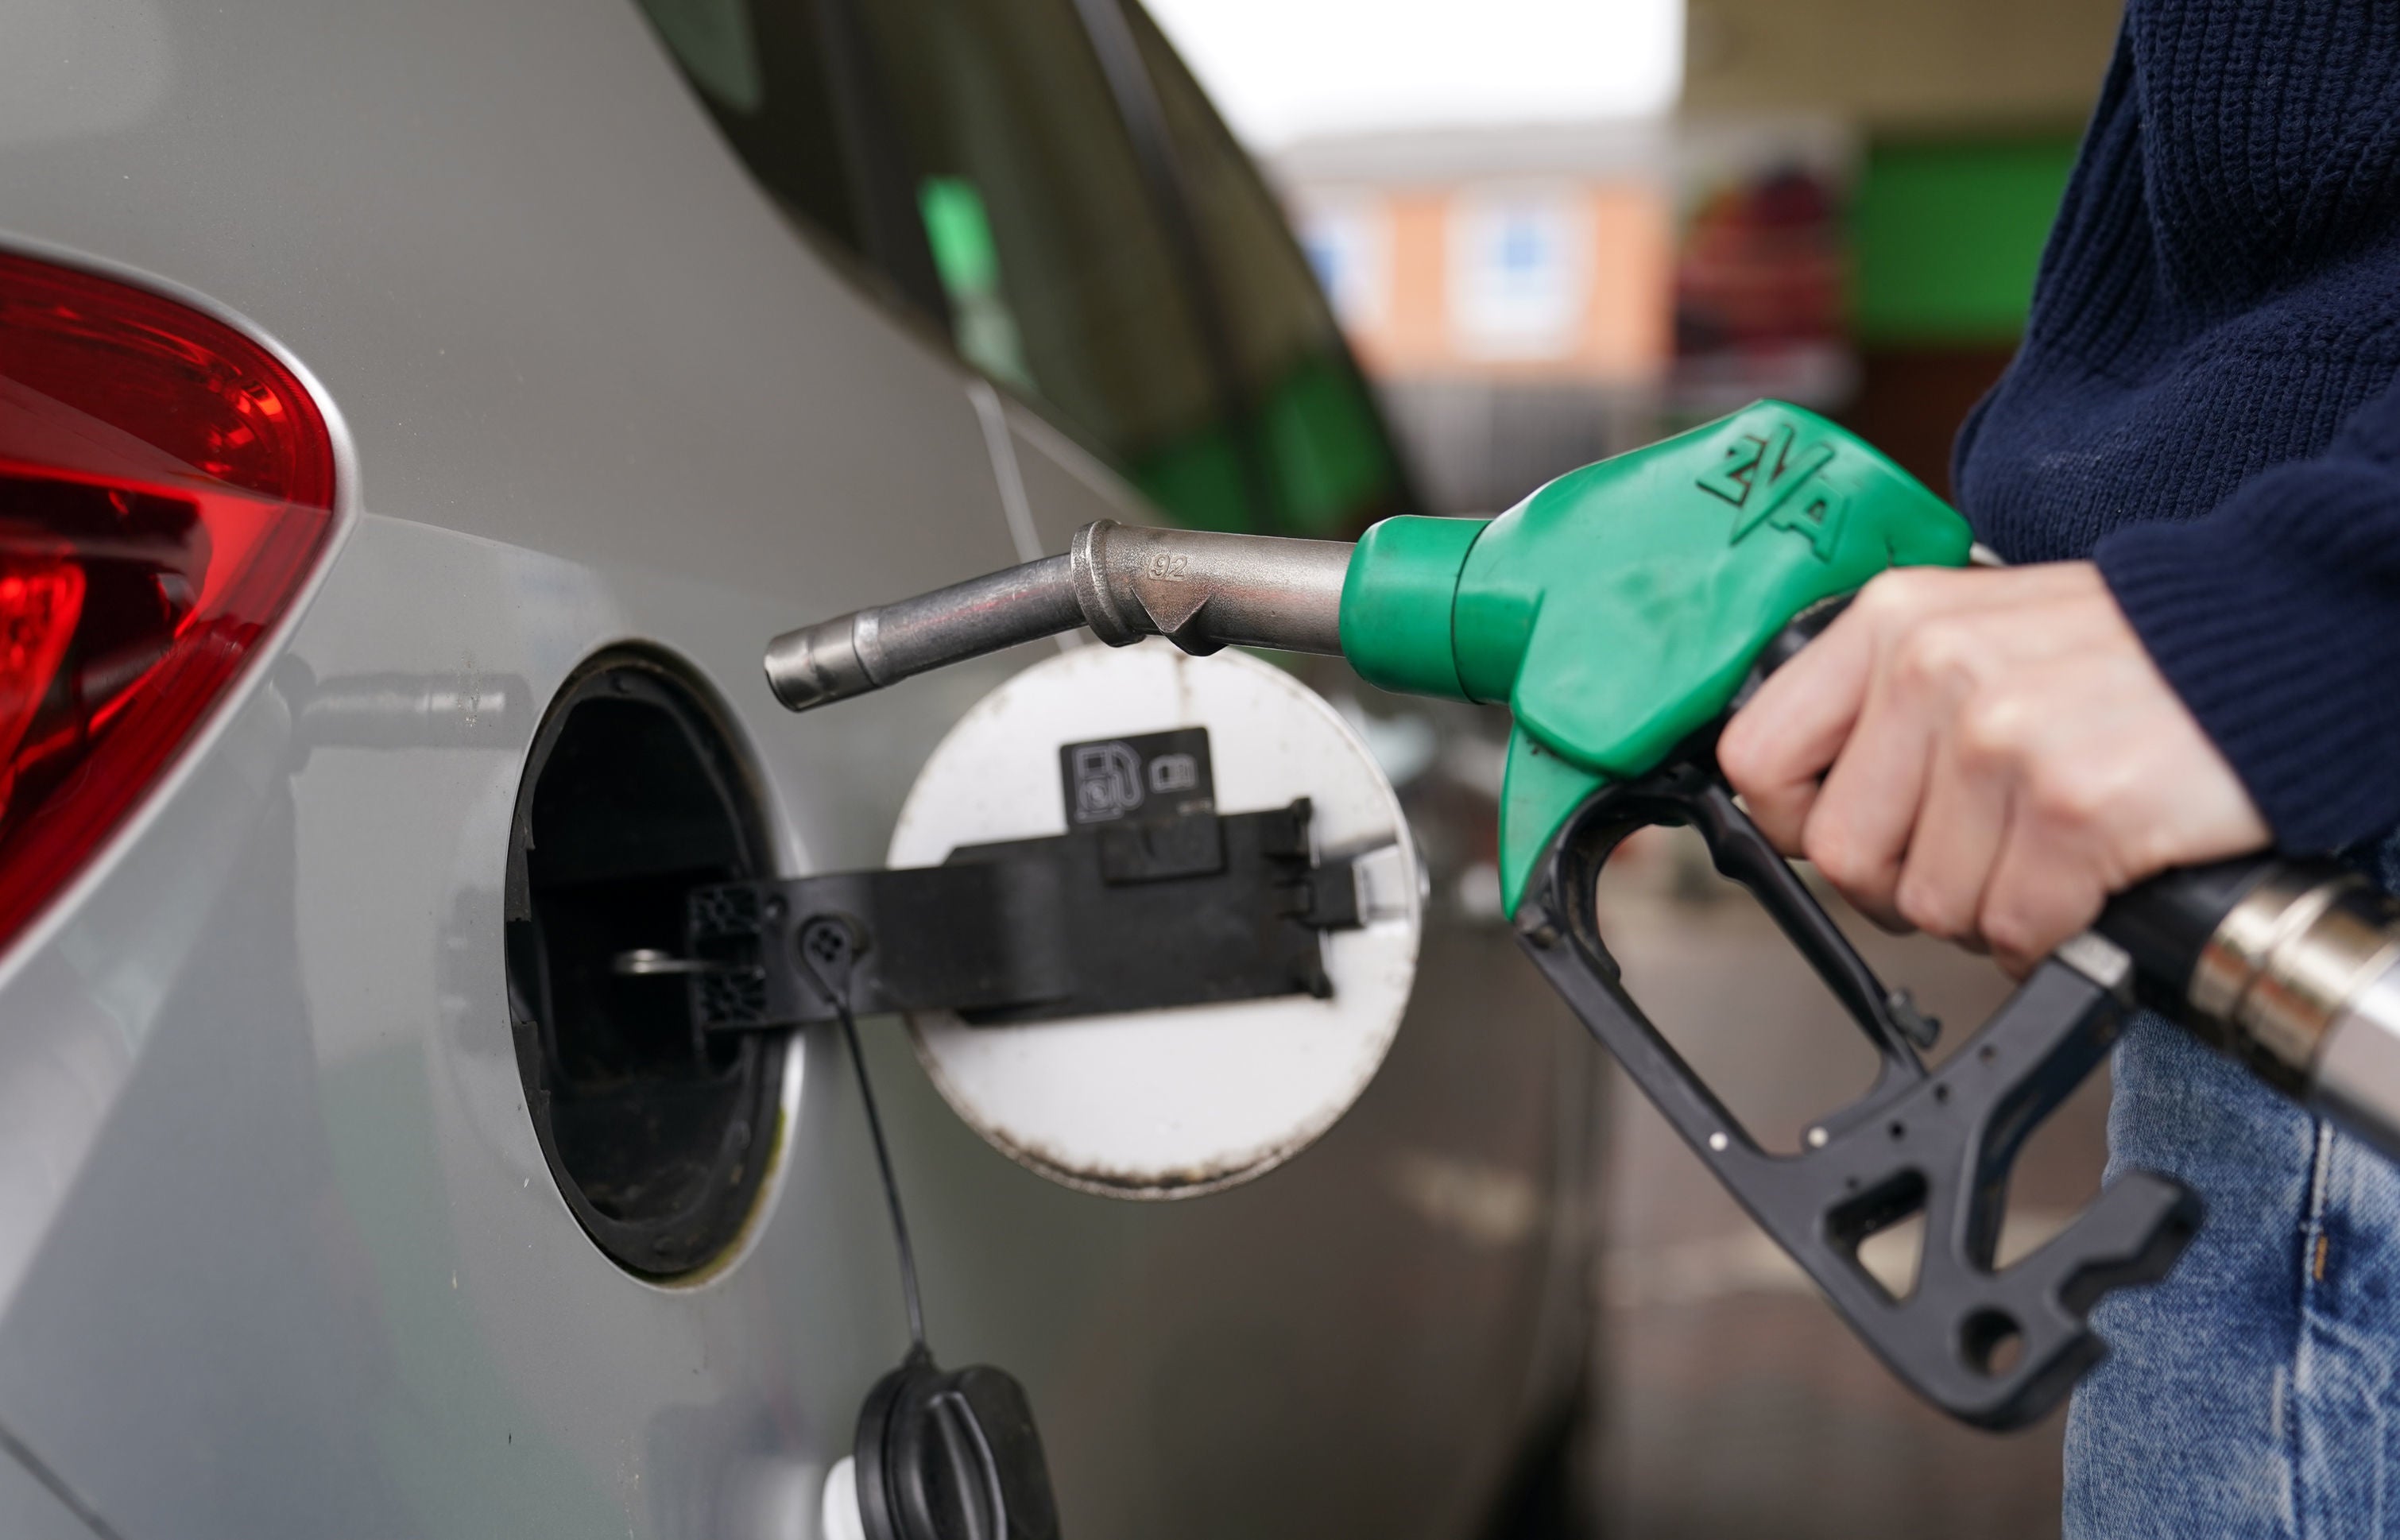 The RAC said the decision would “inevitably” lead to higher fuel prices